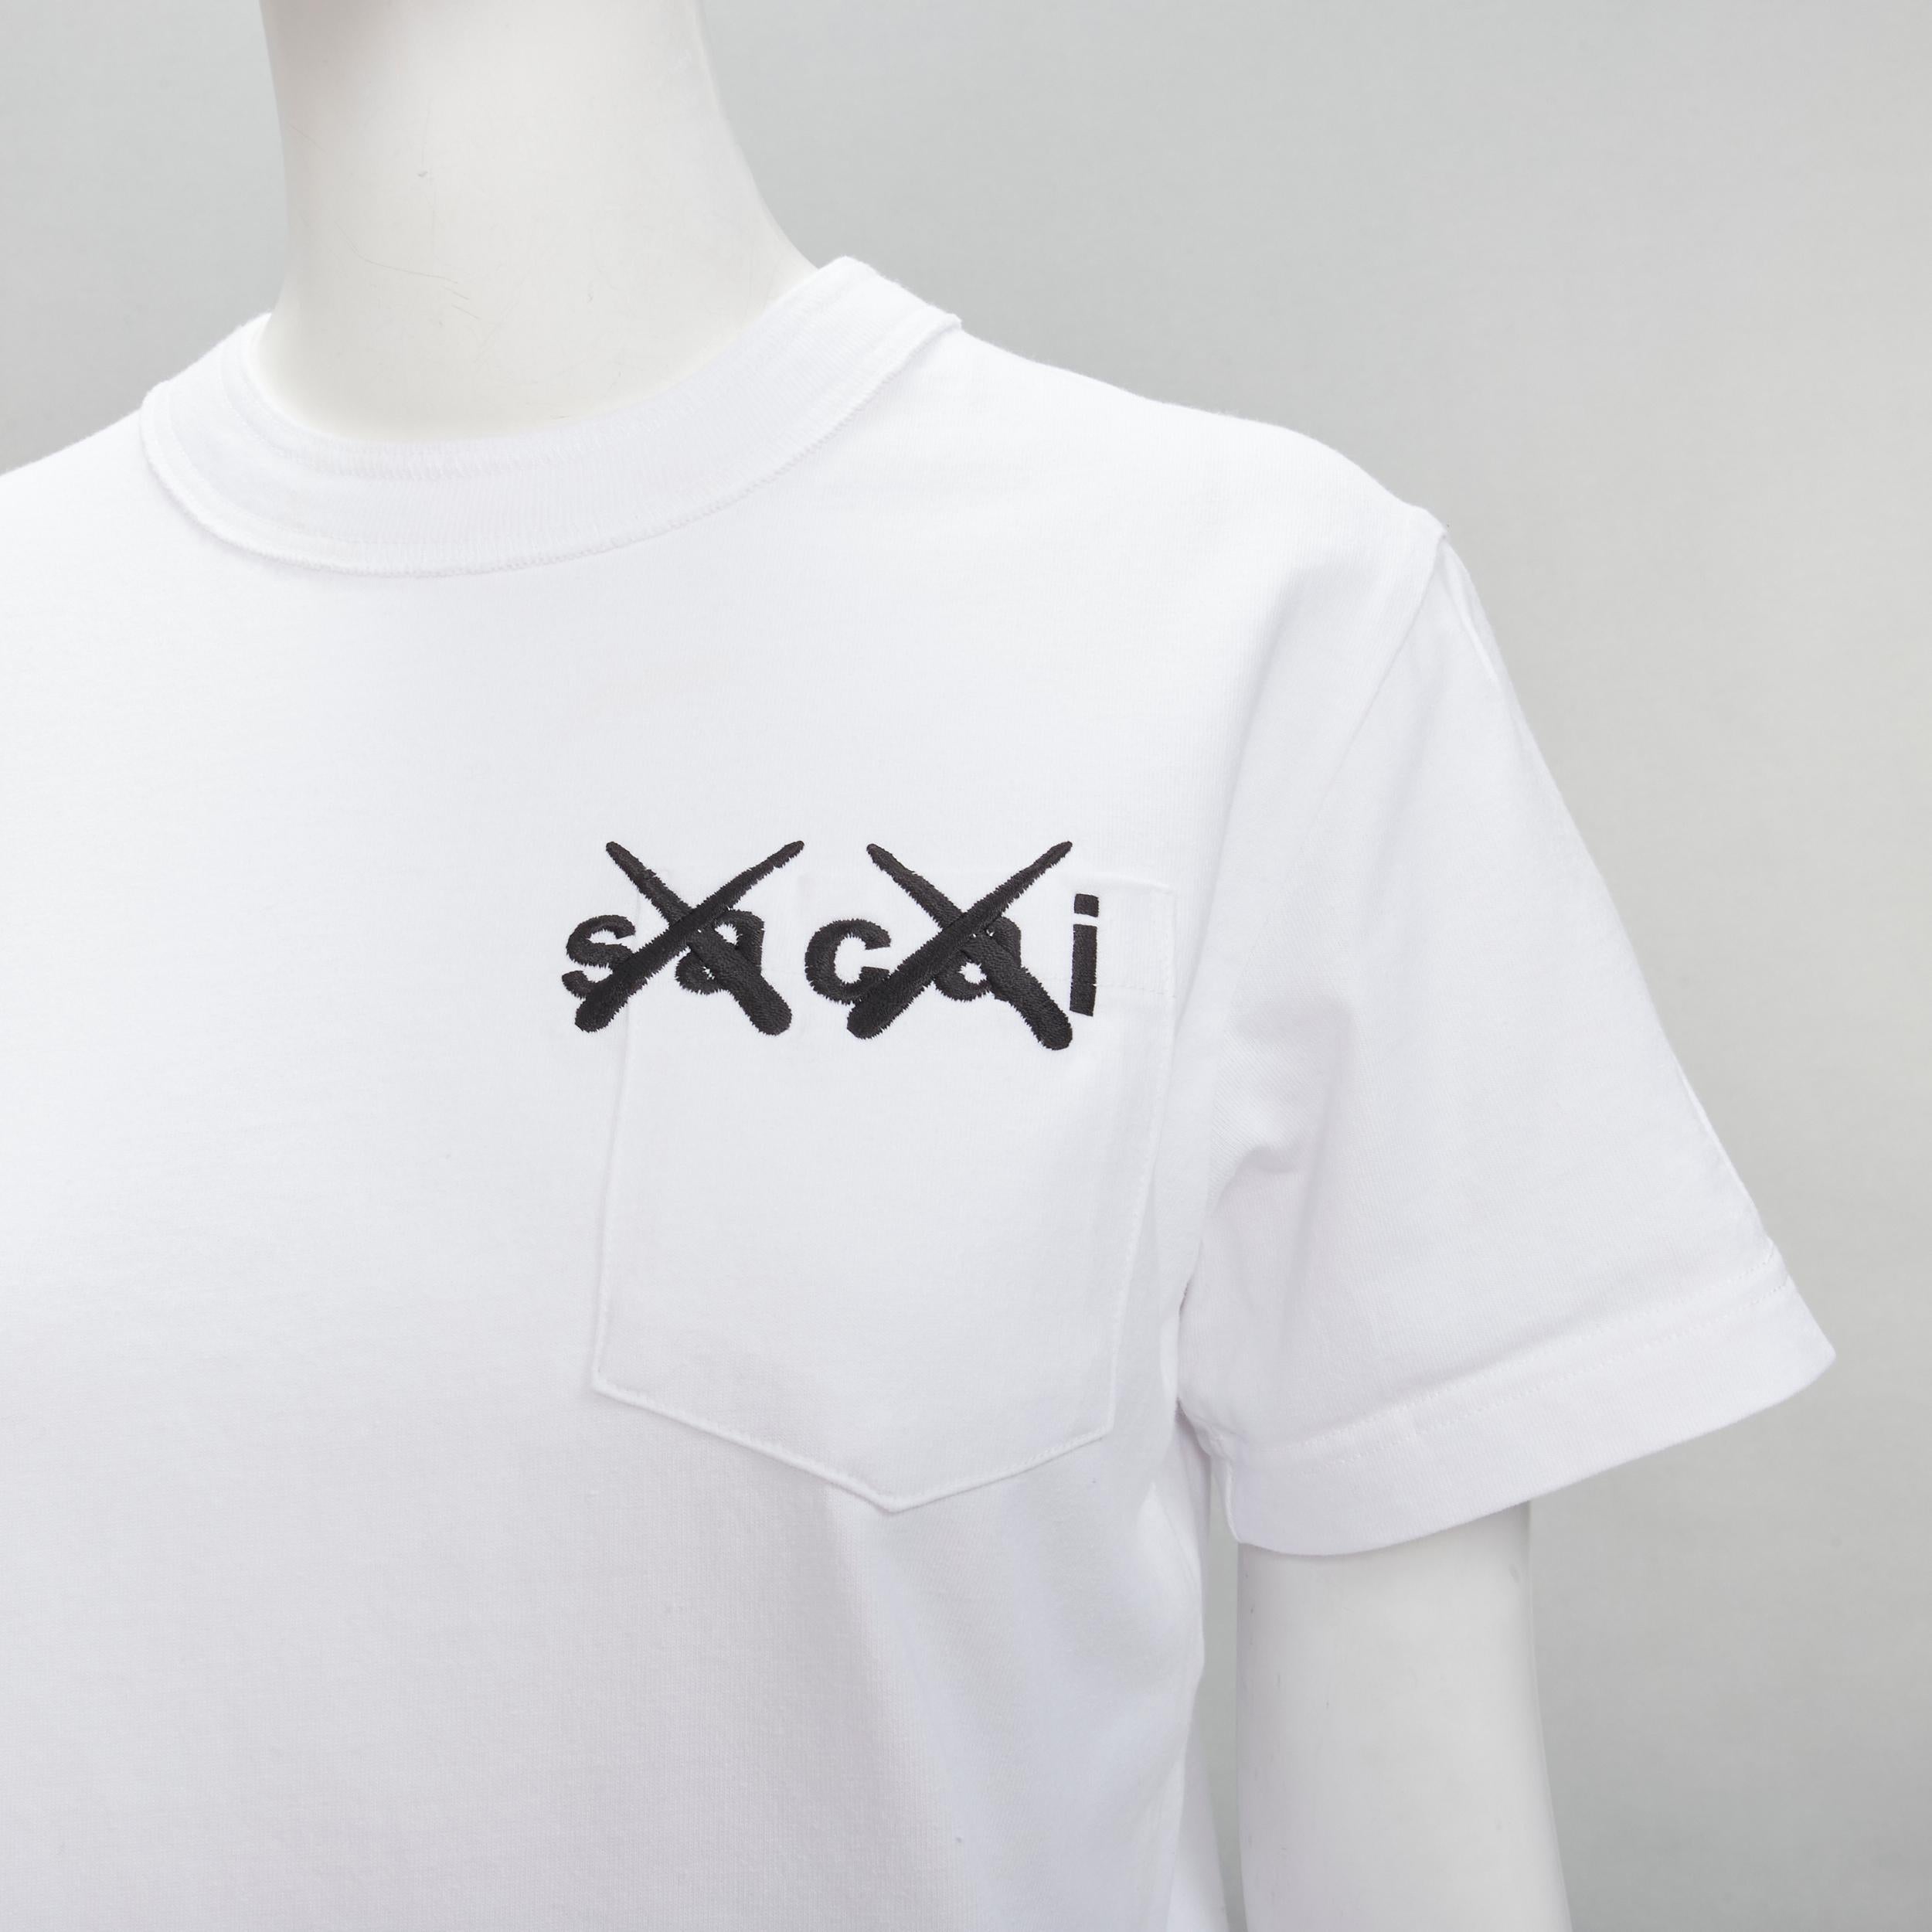 SACAI KAWS XX logo embroidery pocket white cotton boxy tshirt JP0 XS
Brand: Sacai
Designer: Chitose Abe
Material: Cotton
Color: White
Pattern: Solid
Extra Detail: Patch chest pocket.
Made in: Japan

CONDITION:
Condition: Excellent, this item was